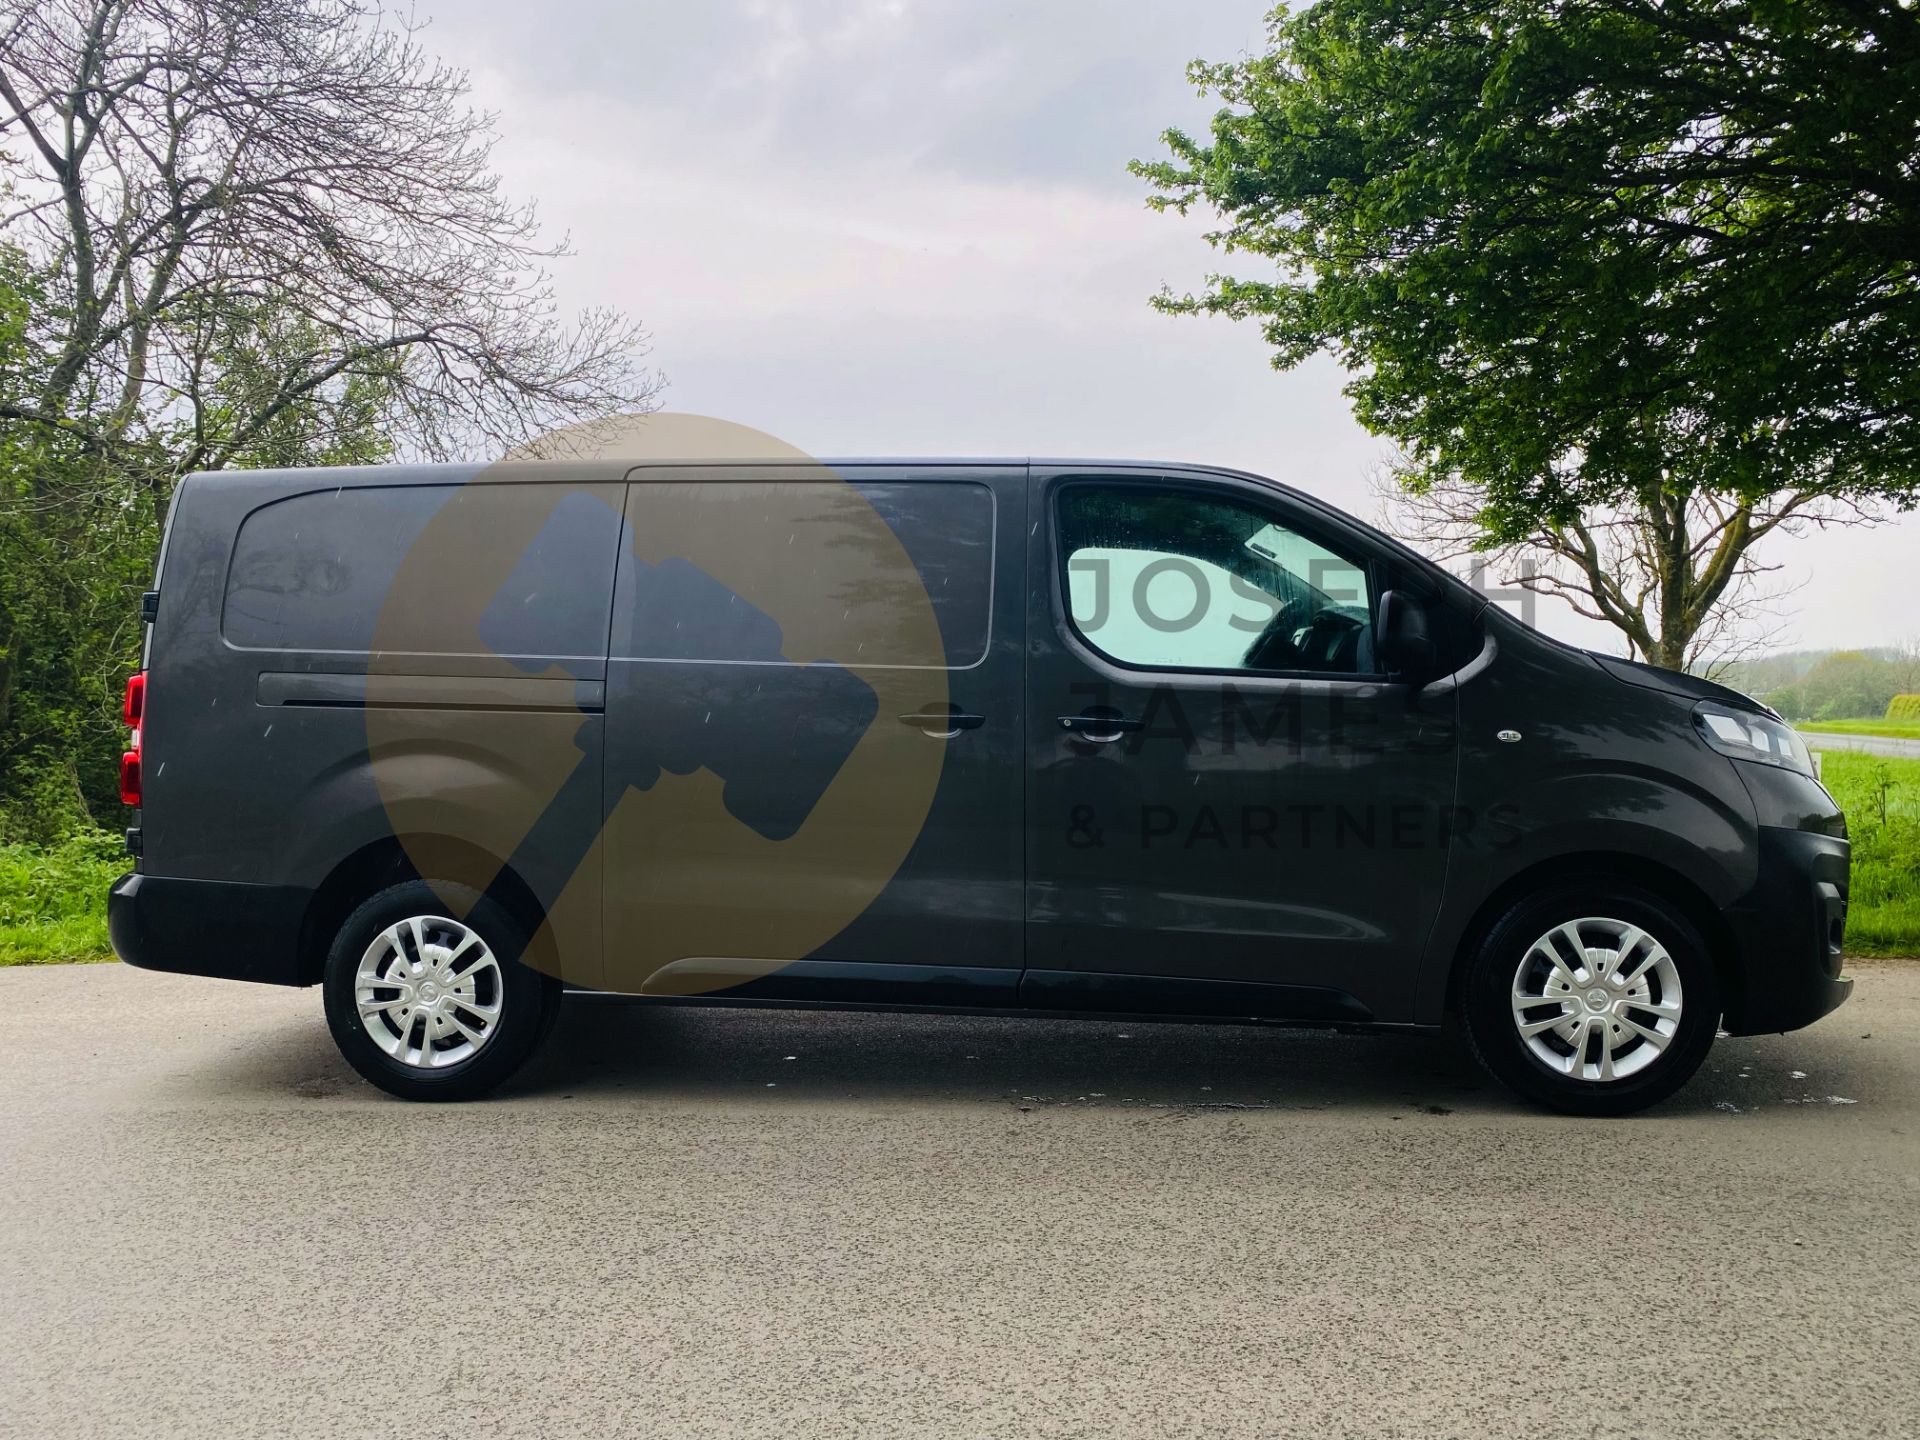 (On Sale) VAUXHALL VIVARO "DYNAMIC" 2.0CDTI (120) LWB 3100 (2020) AIR CON - ONLY 80K MILES - 1 OWNER - Image 8 of 19